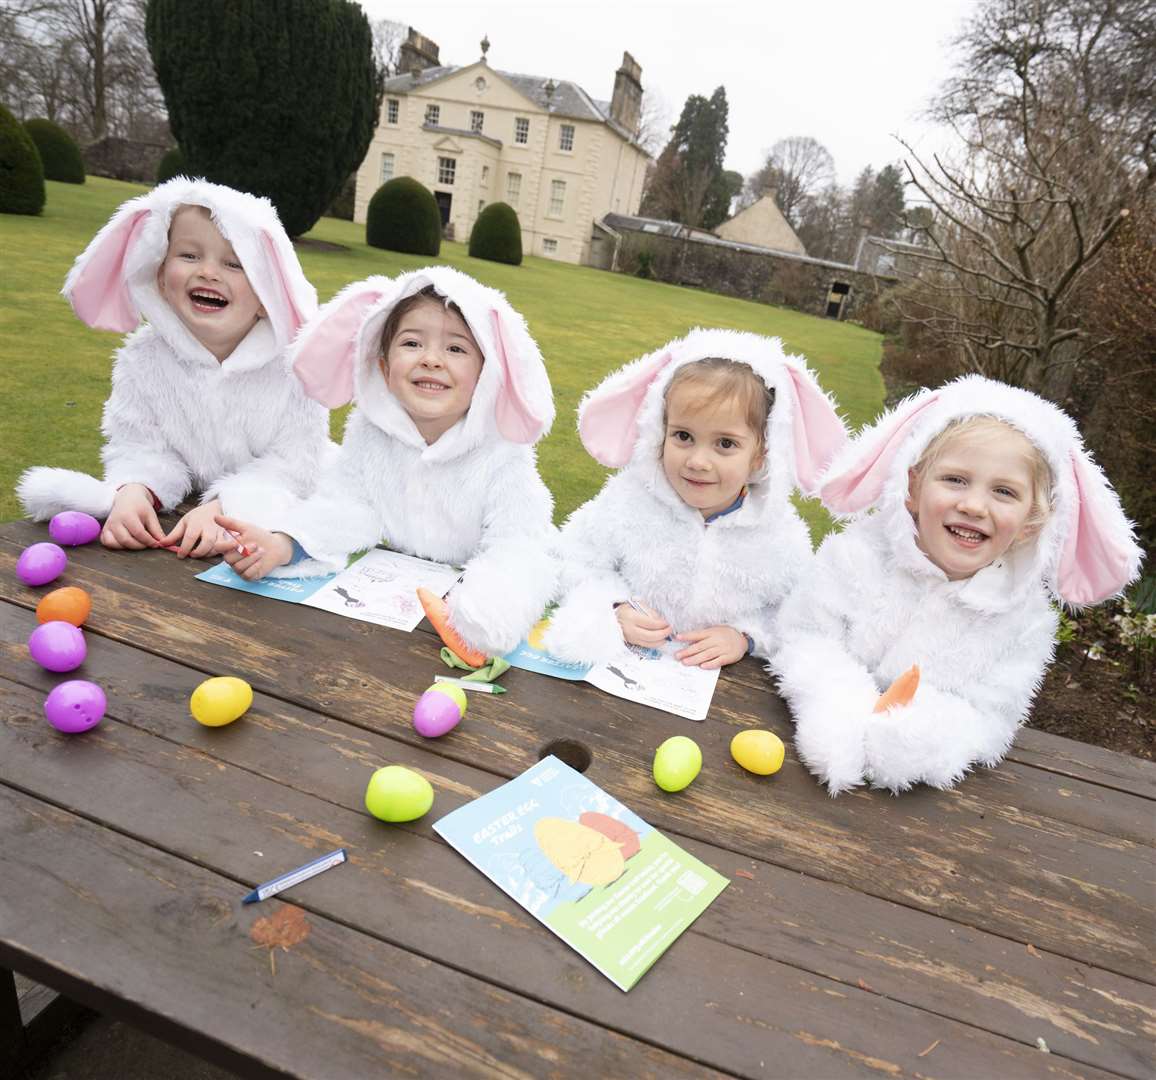 The National Trust for Scotland is hosting 35 Easter egg trails at its propeties across the country from 29 March to 1 April, with lots of family fun and choclatey prizes to be won - left to right, Jonathan Zaltane, Orlaith O’Donnell, Penny Mahindry, Eden McAllister. Picture: NTScotland